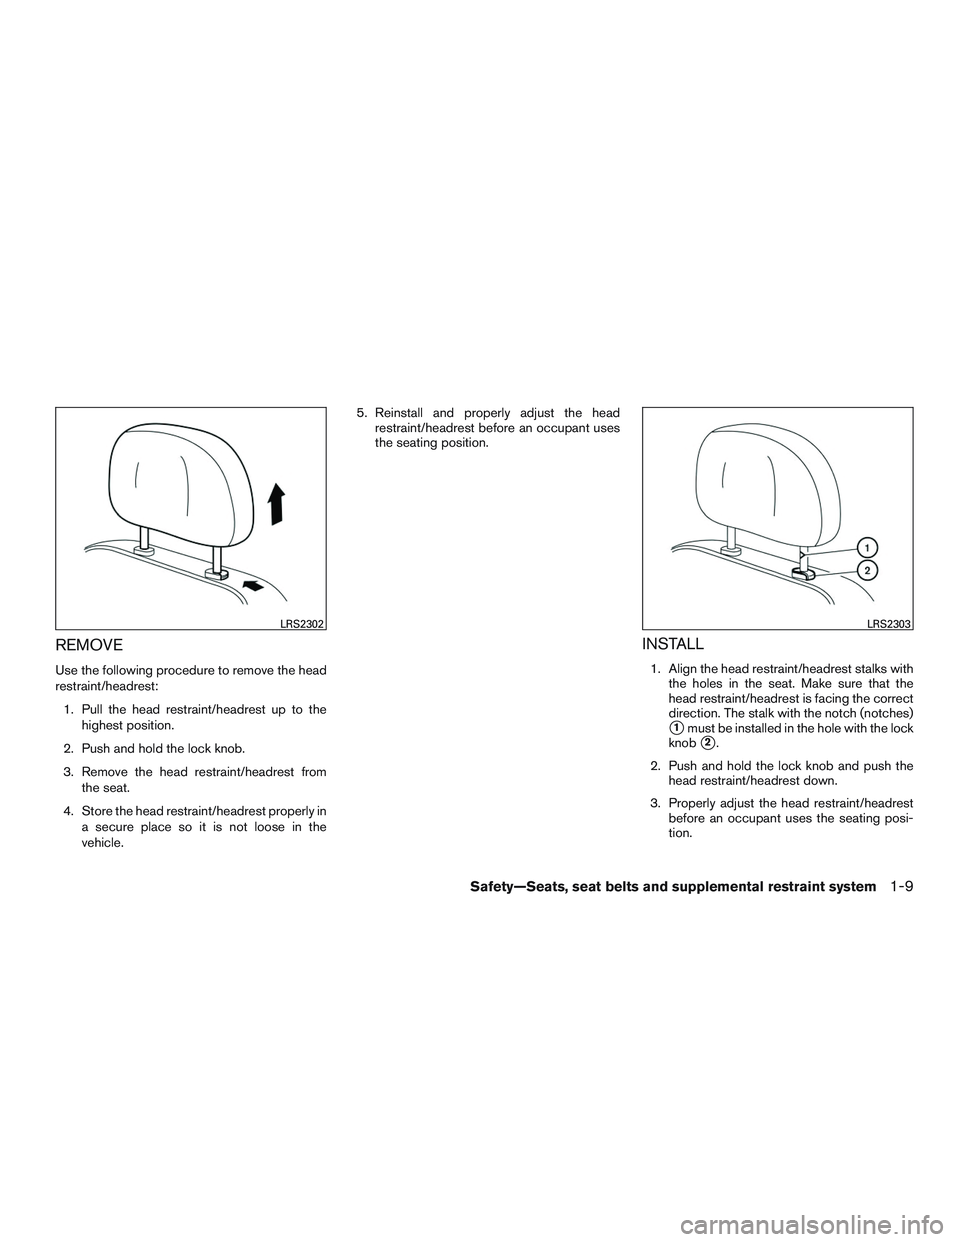 NISSAN ALTIMA SEDAN 2015 Owners Manual REMOVE
Use the following procedure to remove the head
restraint/headrest:1. Pull the head restraint/headrest up to the highest position.
2. Push and hold the lock knob.
3. Remove the head restraint/he